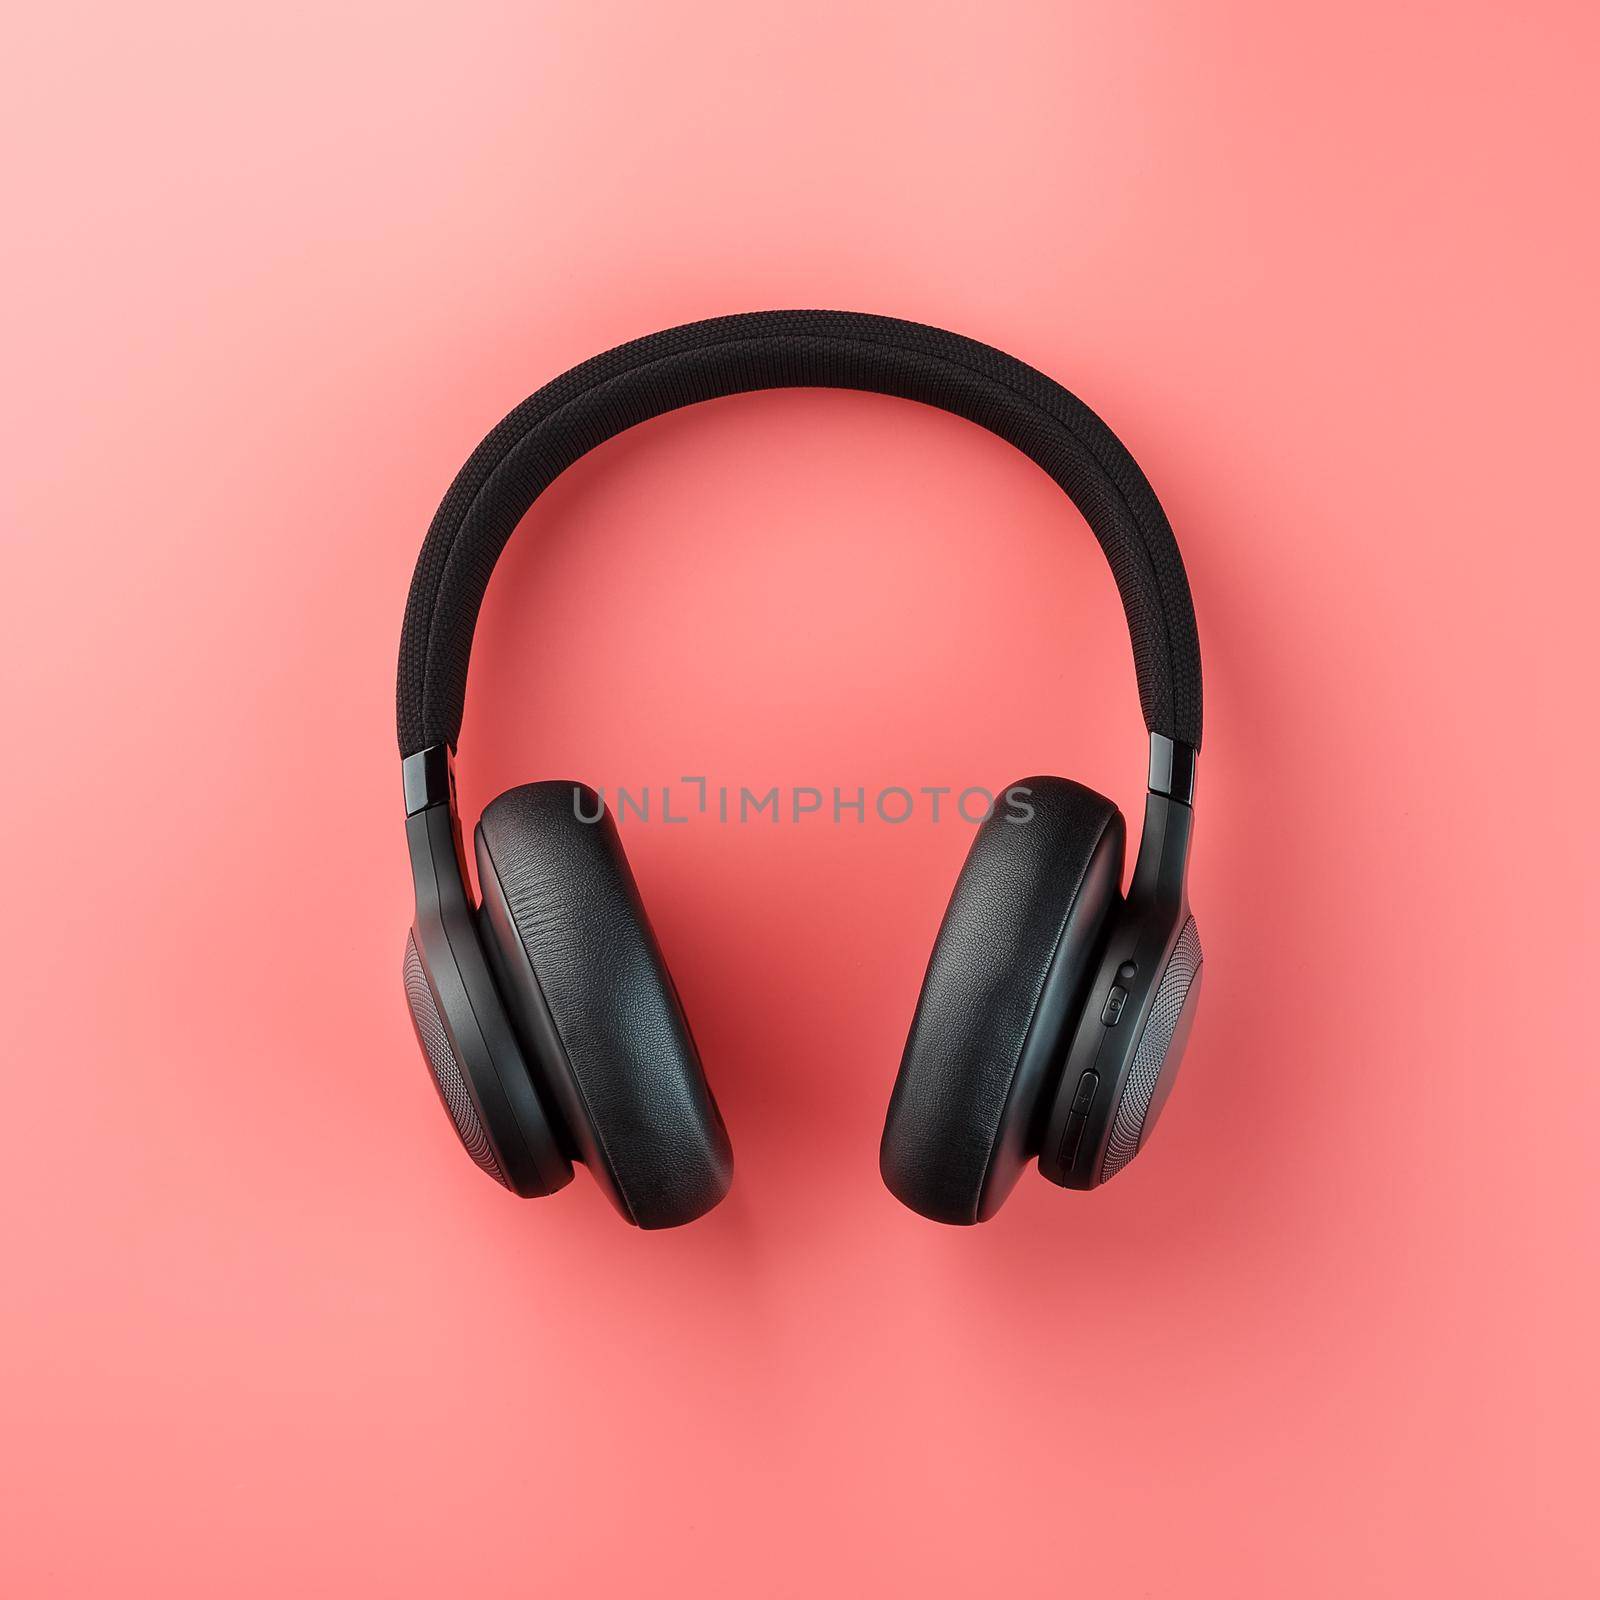 Wireless black headphones on a pink background. View from above. In-ear headphones for playing games and listening to music tracks. Modern style